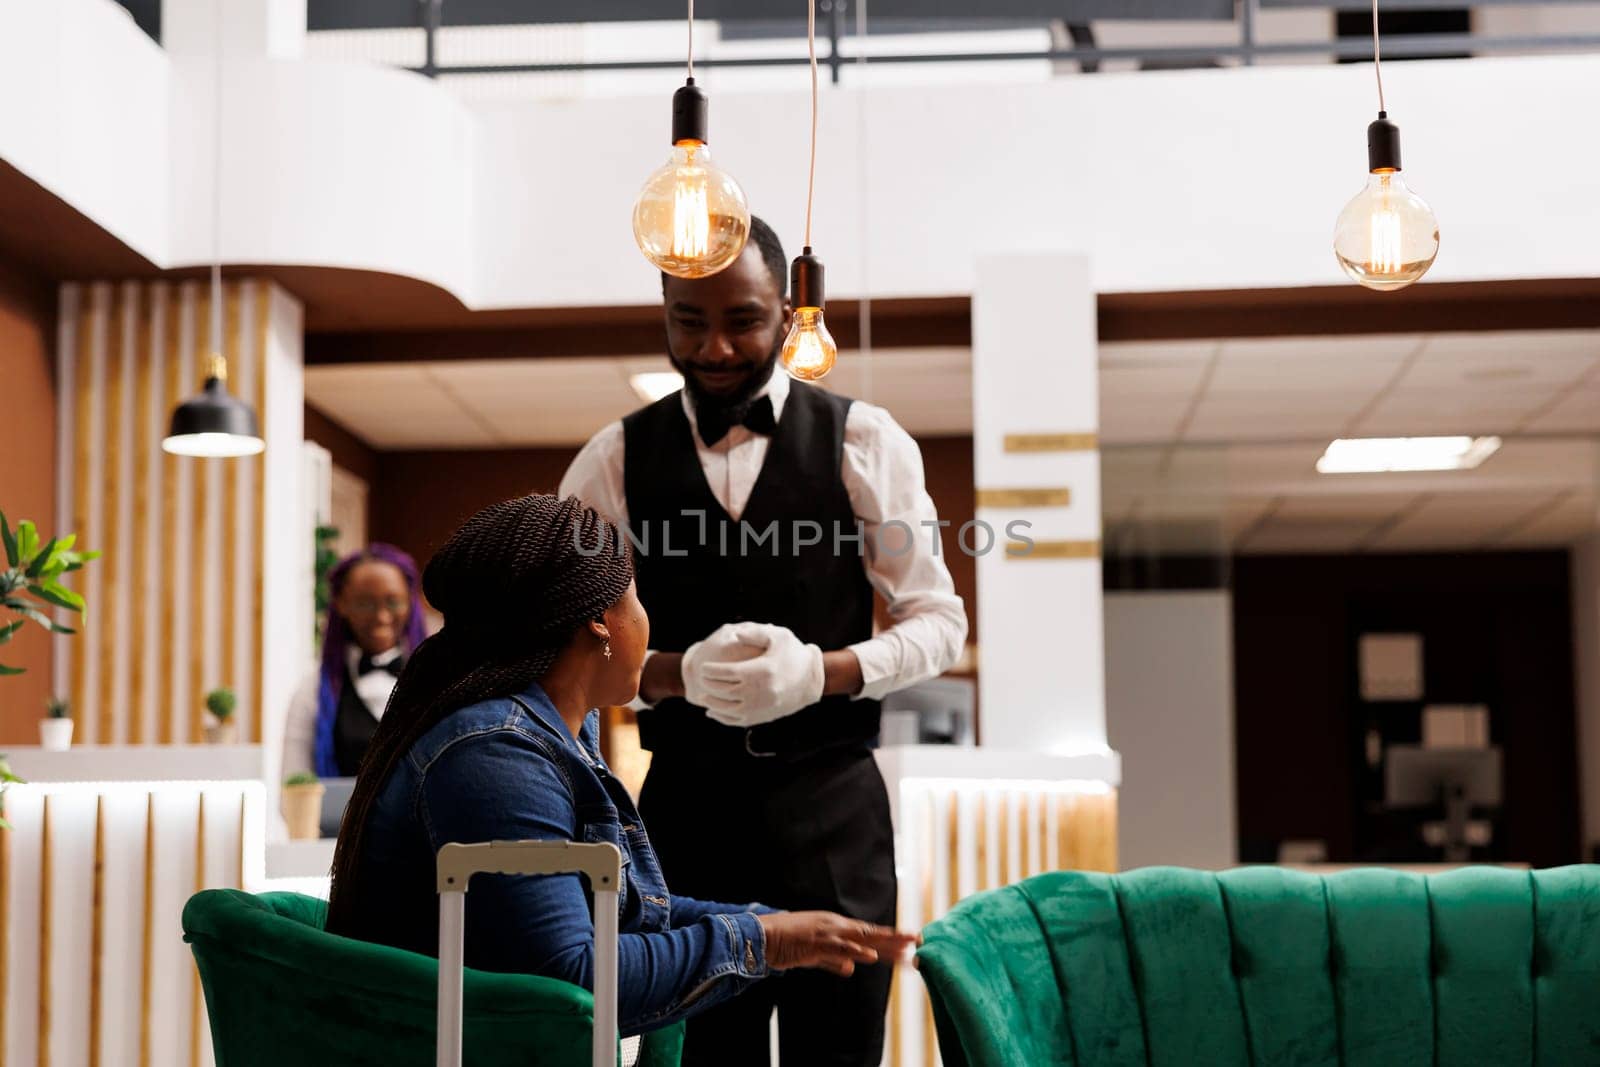 Smiling friendly hotel bellboy wearing uniform talking with African American woman guest sitting in lobby with luggage. Bellman greeting tourist, offering traveler to help carry suitcase